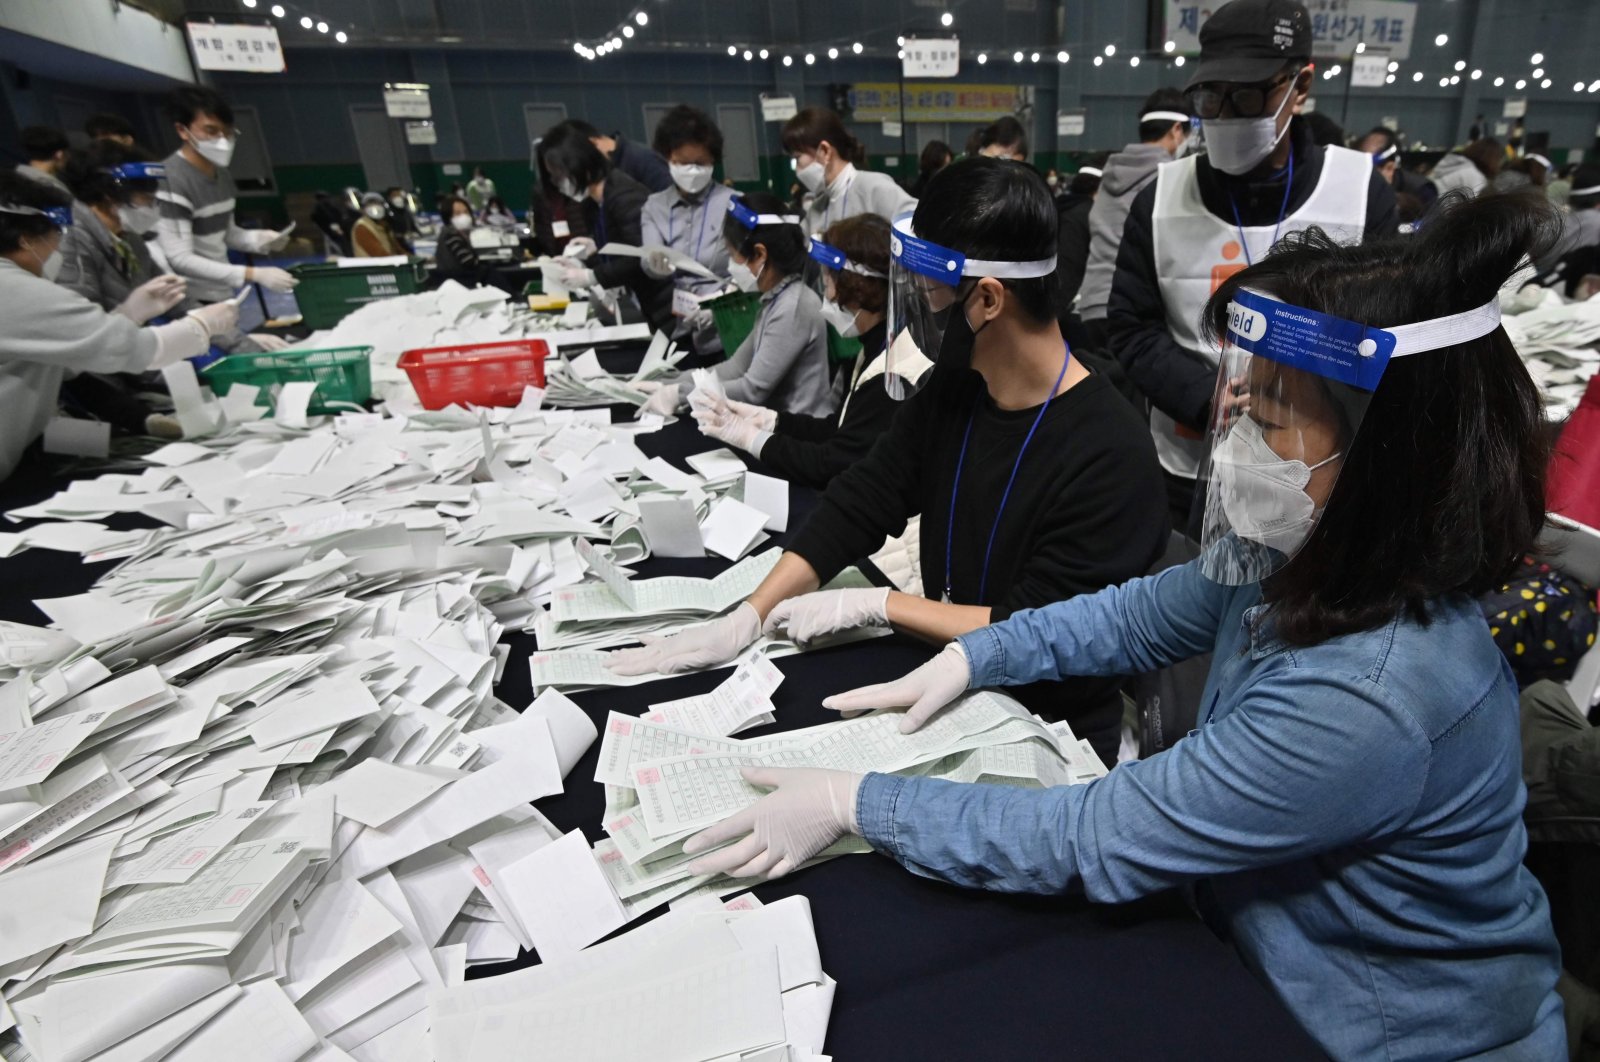 South Korean election officials sort voting papers for ballot counting in the parliamentary elections at a gymnasium in Seoul, South Korea, April 15, 2020. (AFP Photo)